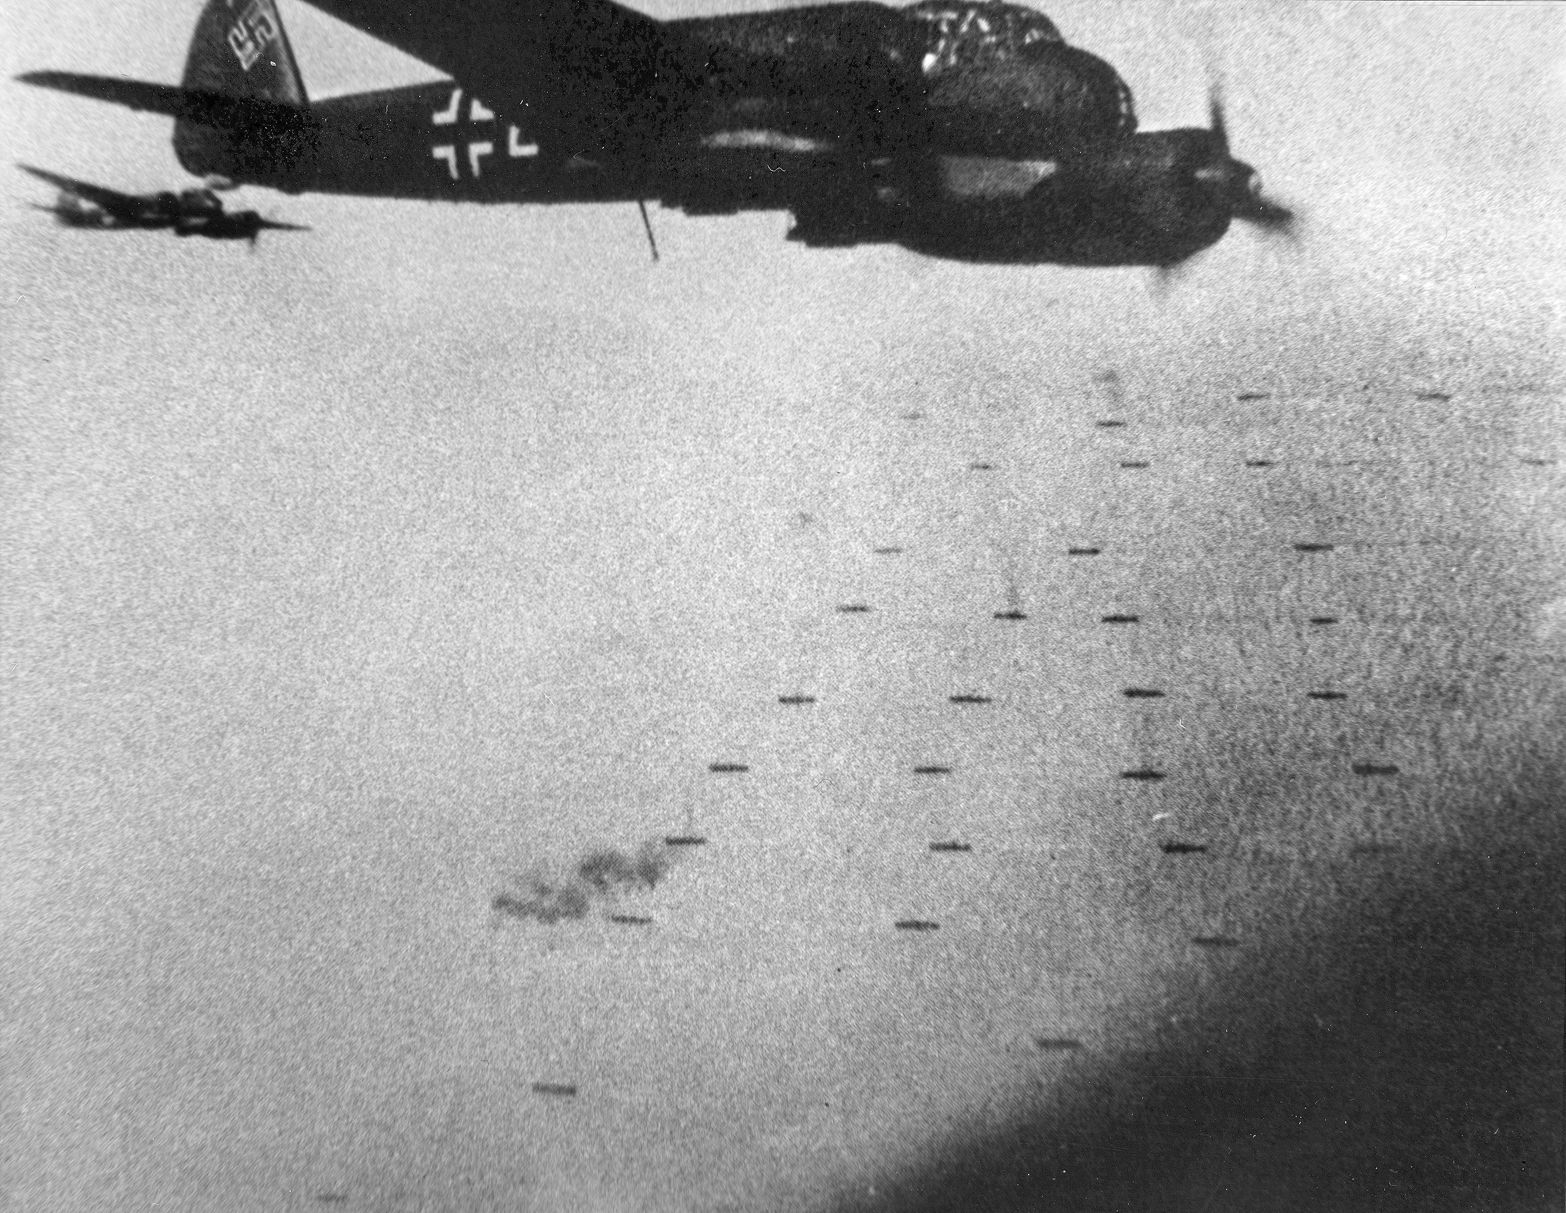 The tight formation of Convoy PQ-17 before the order to scatter was received is visible below a high-flying German Junkers Ju-88 bomber.